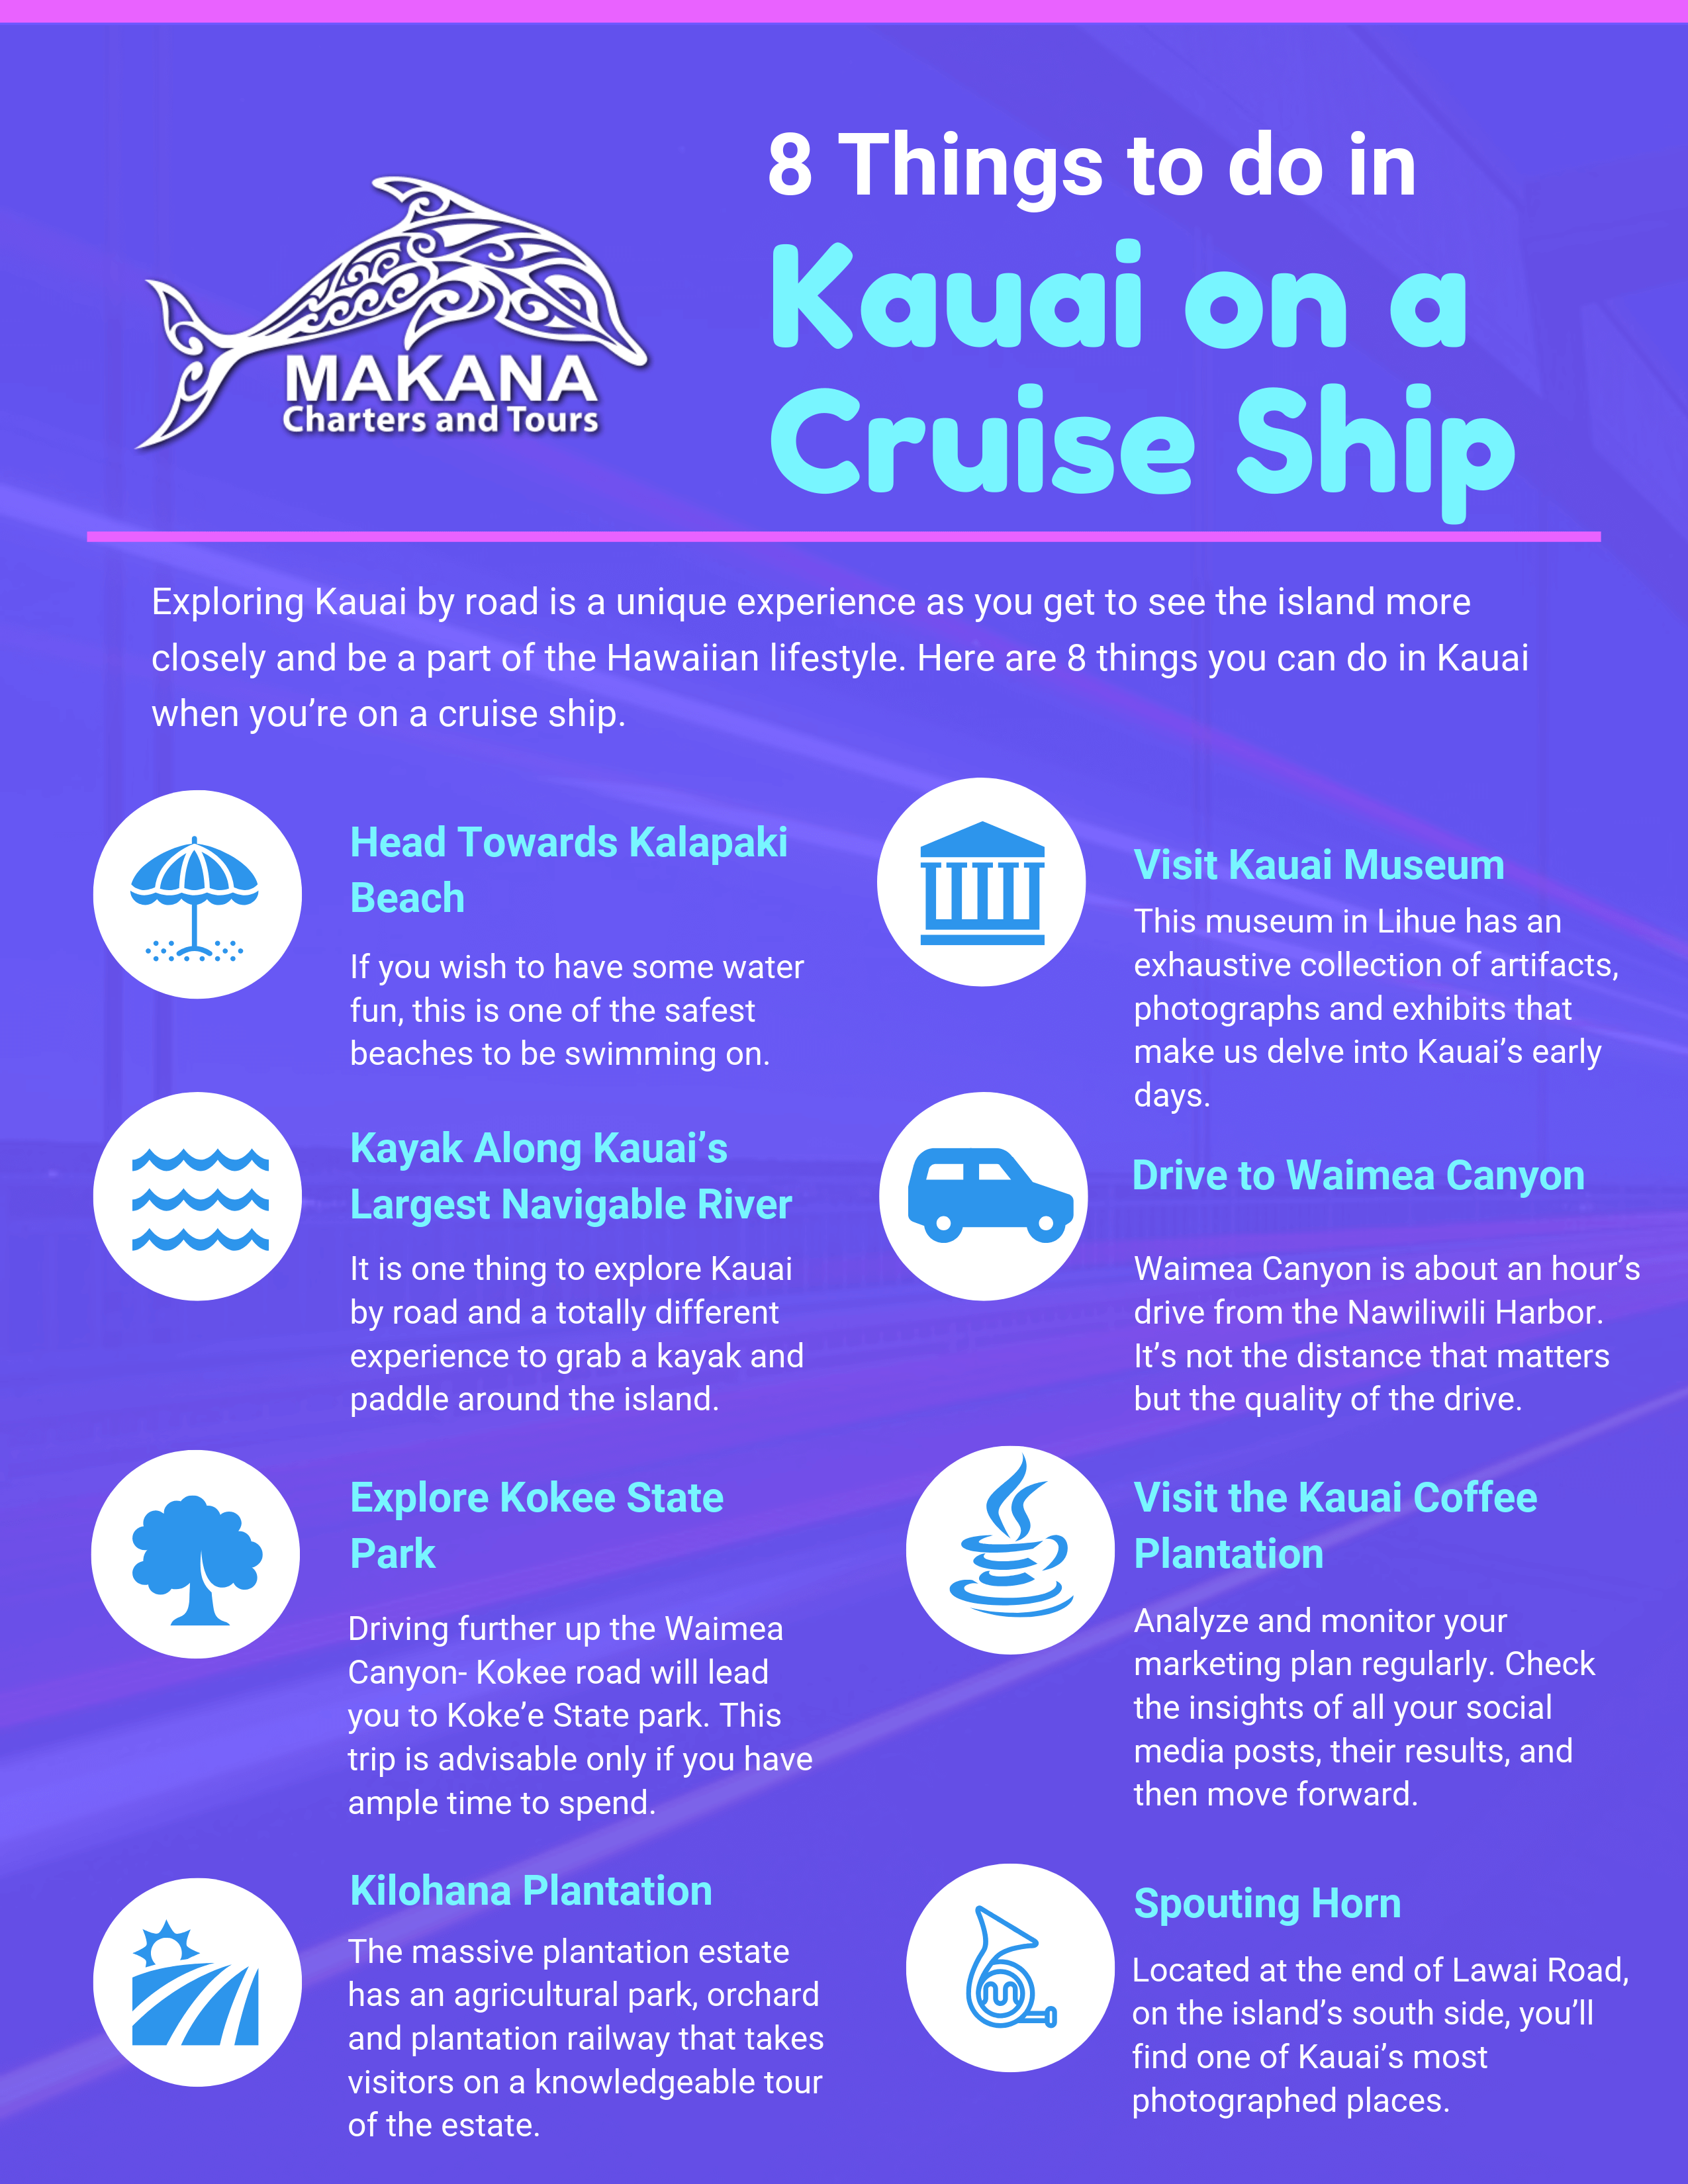 8 Things to do in Kauai on a Cruise Ship [Infographic]